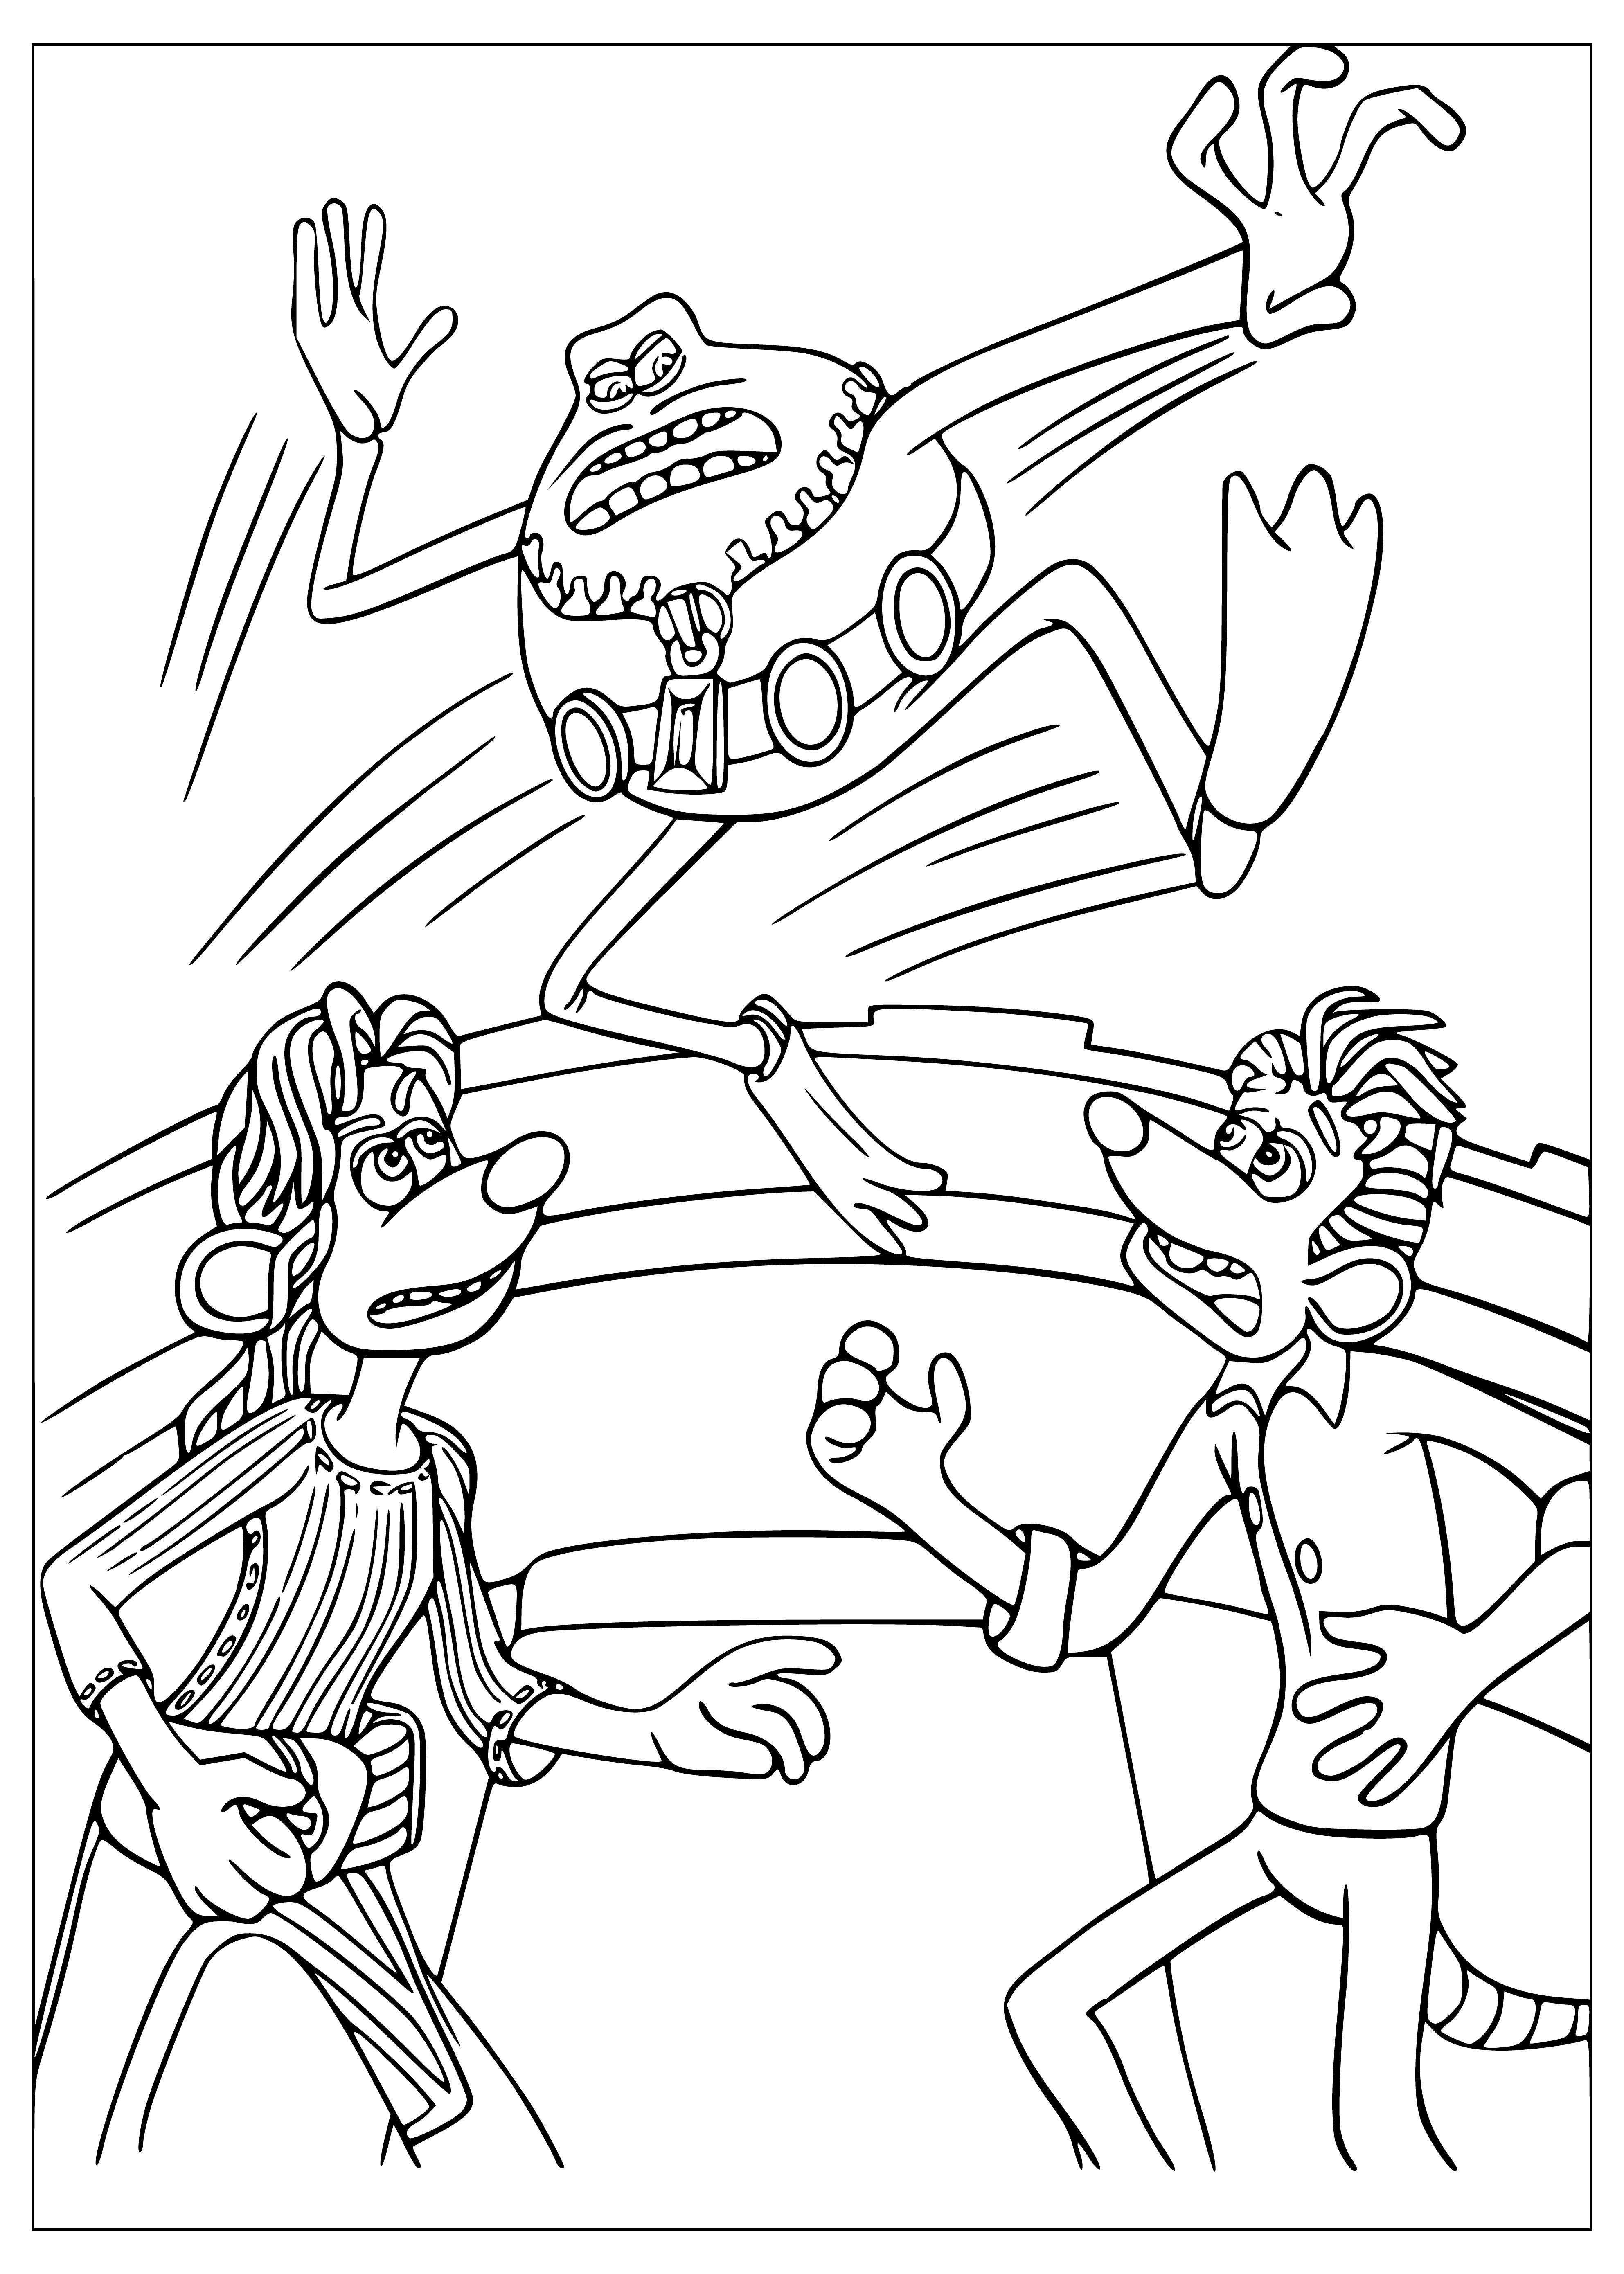 coloring page: Three characters: lily-pad Toad, pink-nosed Rita, black-eyed Roddy.